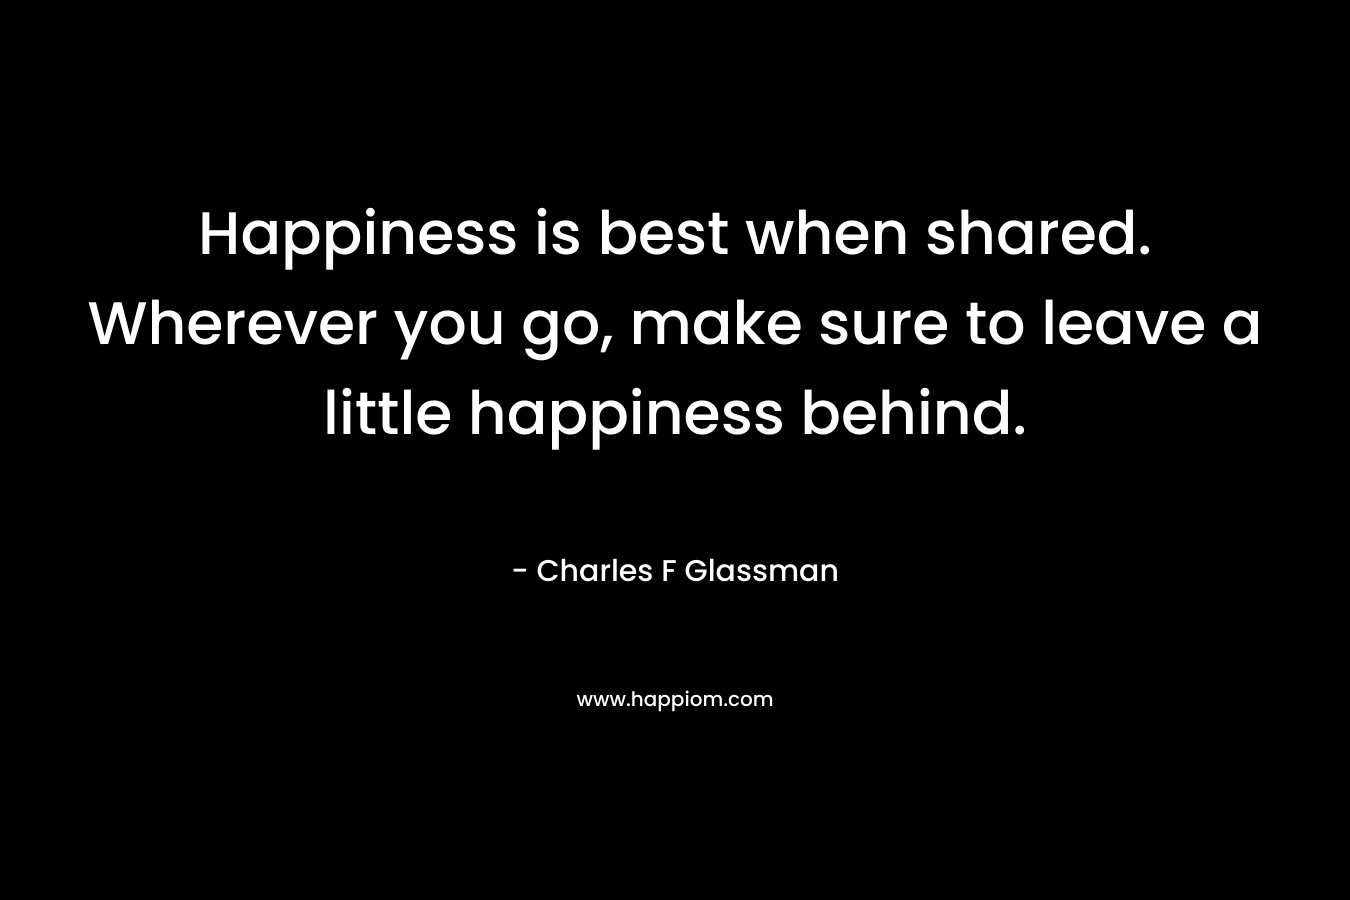 Happiness is best when shared. Wherever you go, make sure to leave a little happiness behind.